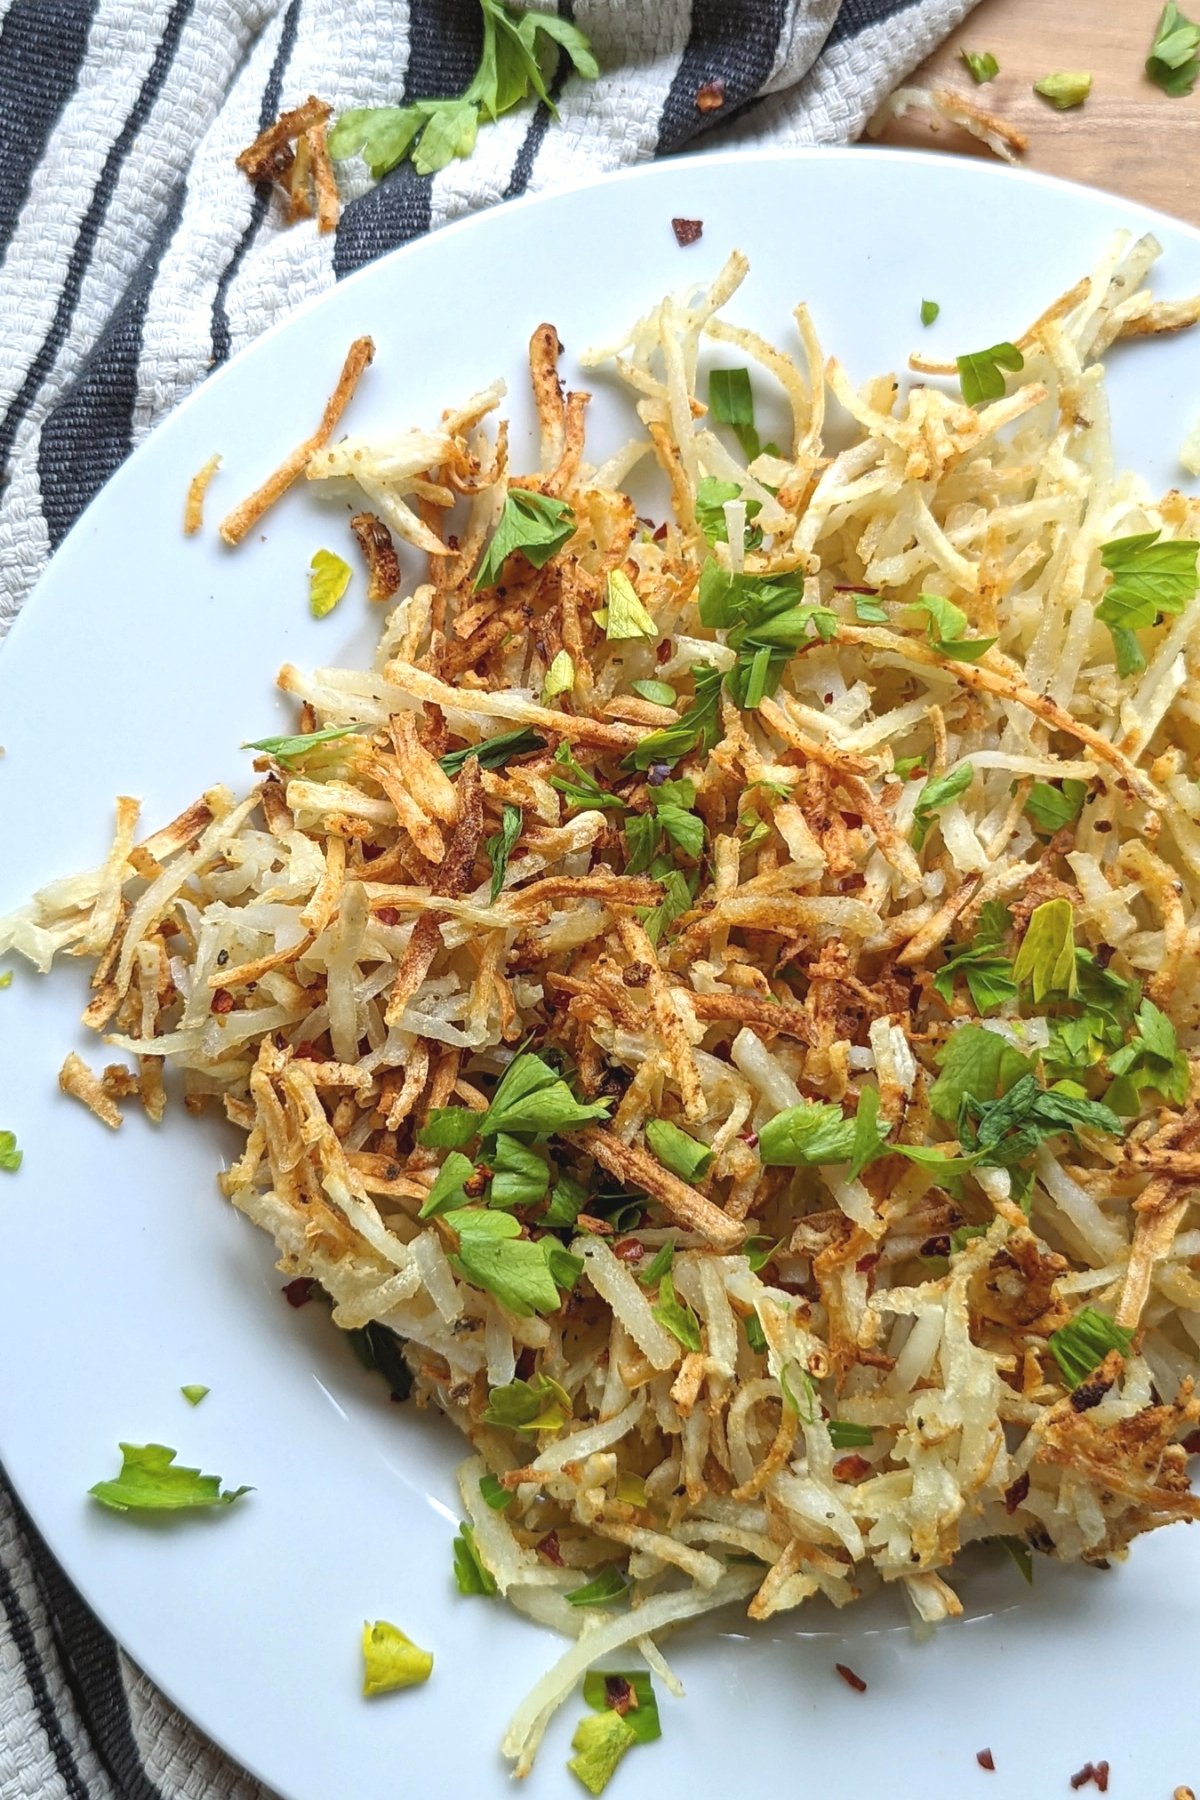 airfryer hash browns recipe frozen hash browns air fryer recipe air fried shredded potatoes with parsley and spices and oil